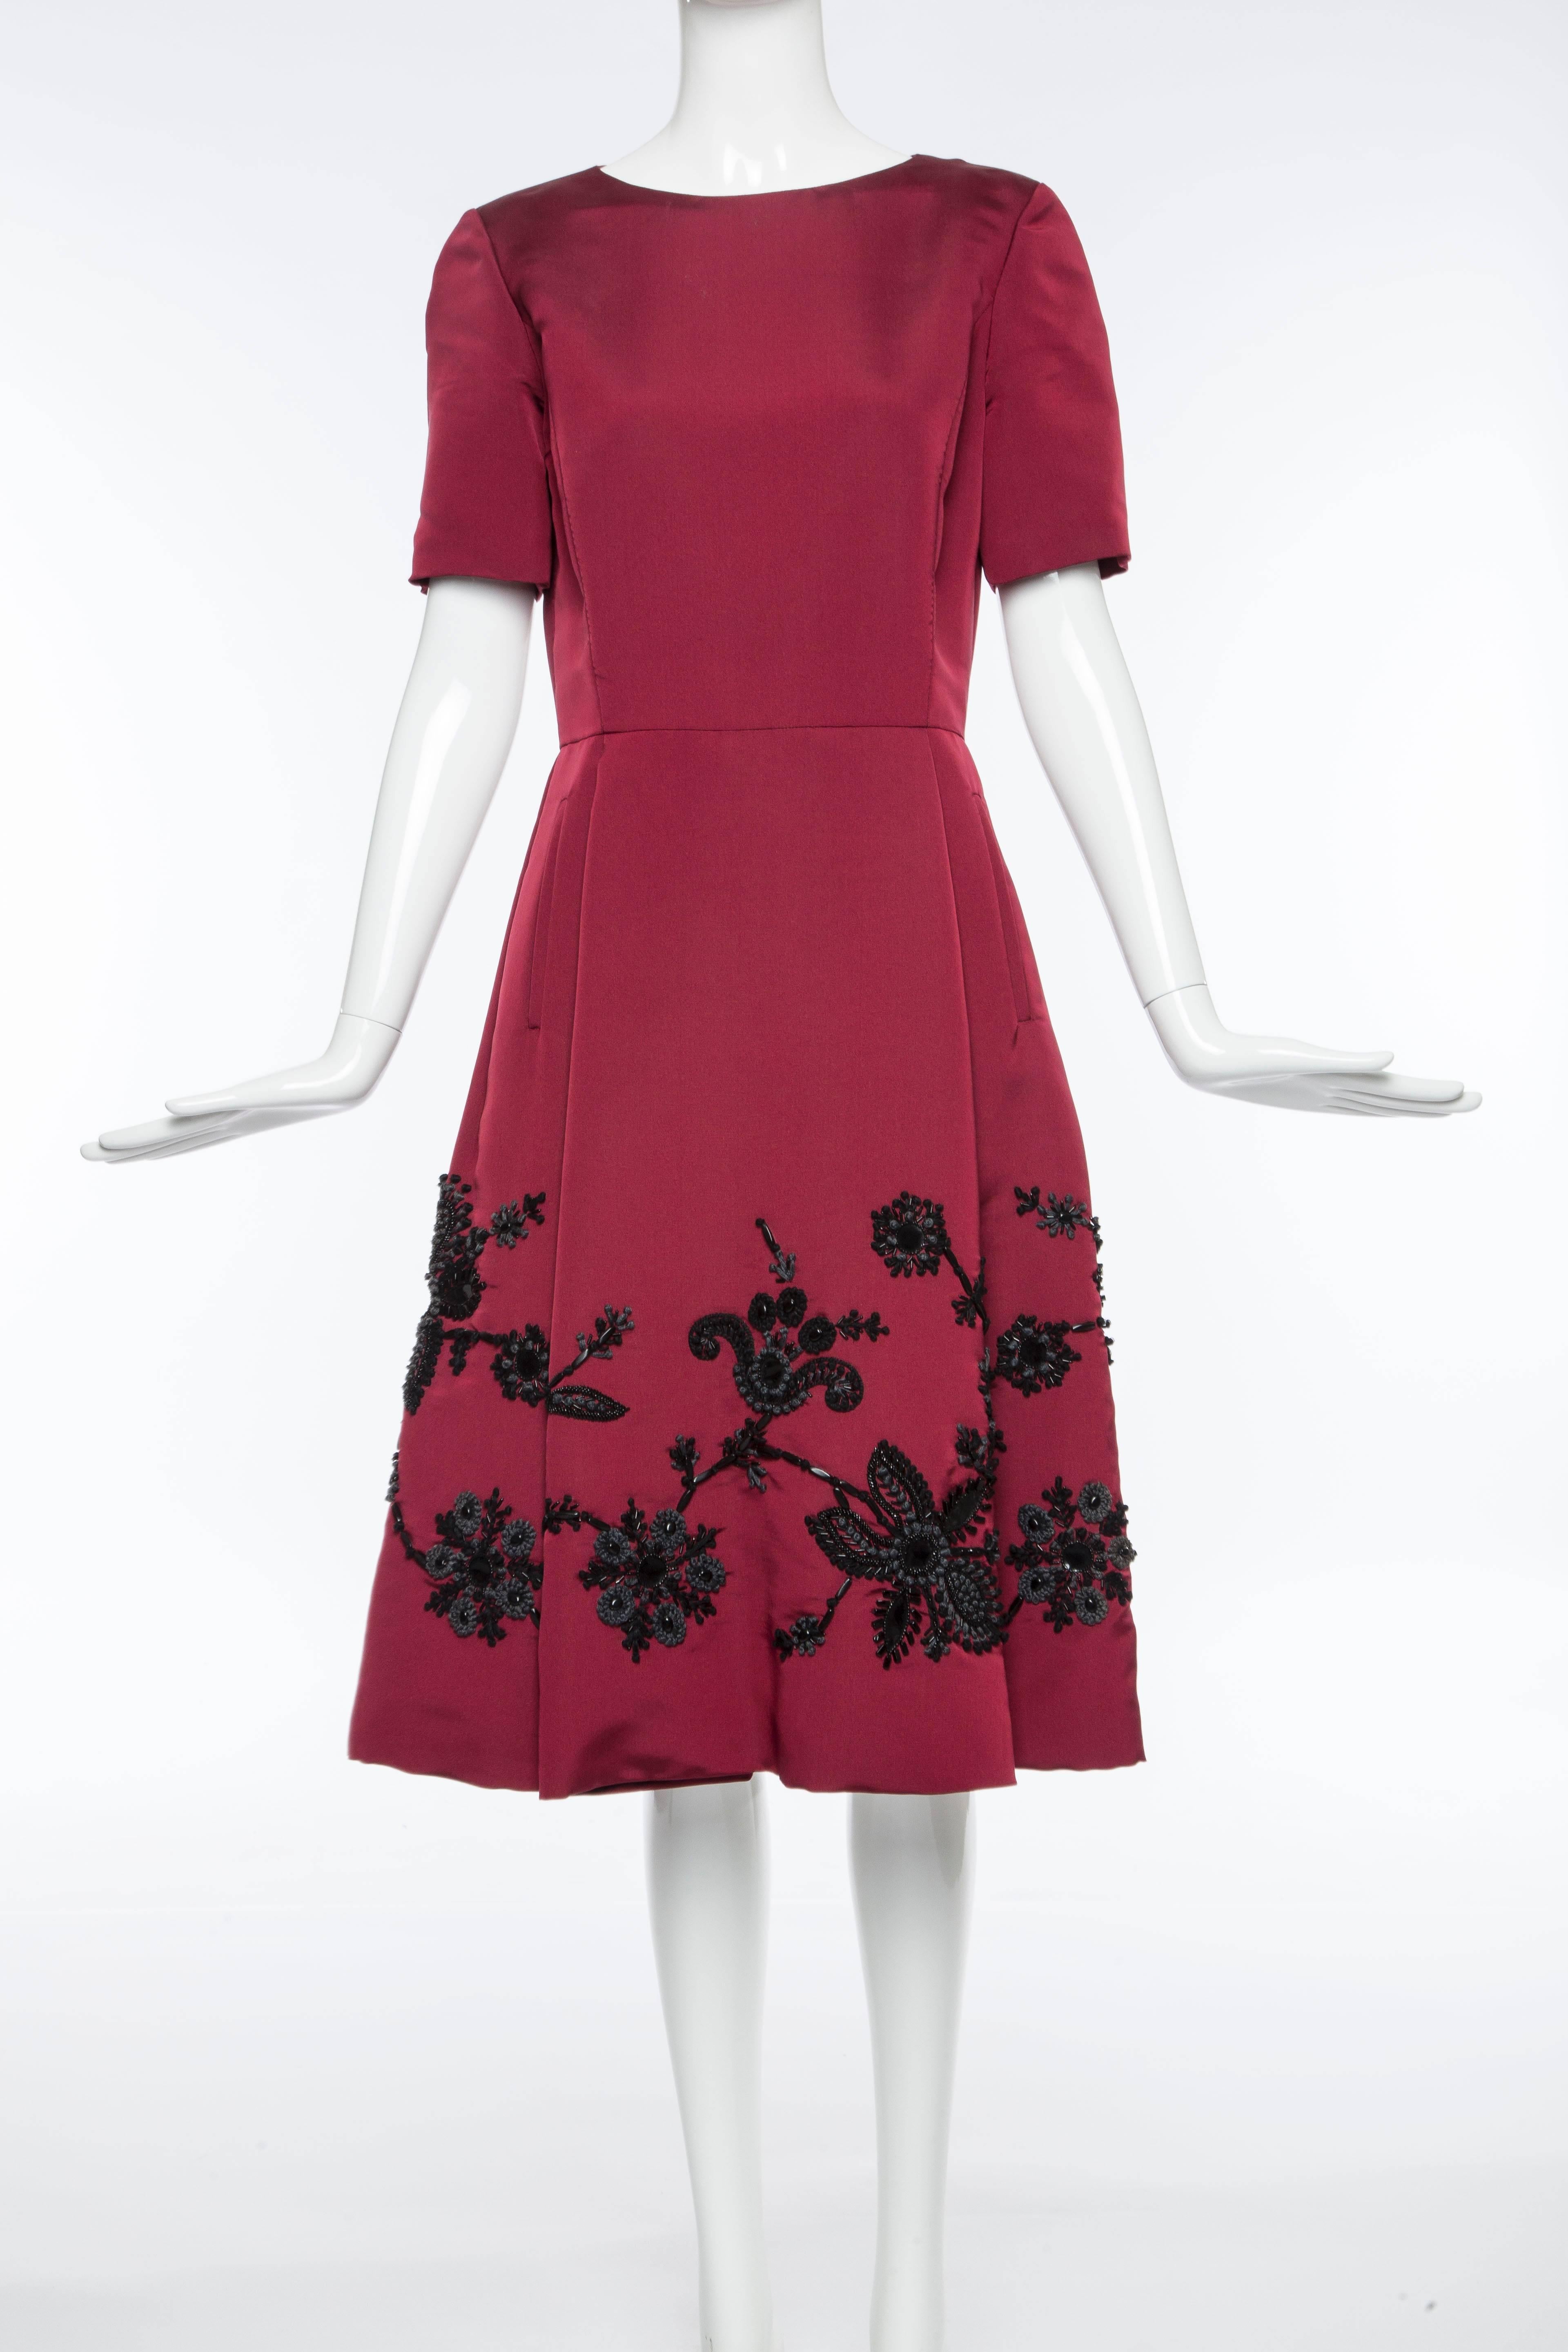 Oscar De la Renta Fall circa 2006 short sleeve silk dress with black embroidery, two front pockets and fully lined in silk.